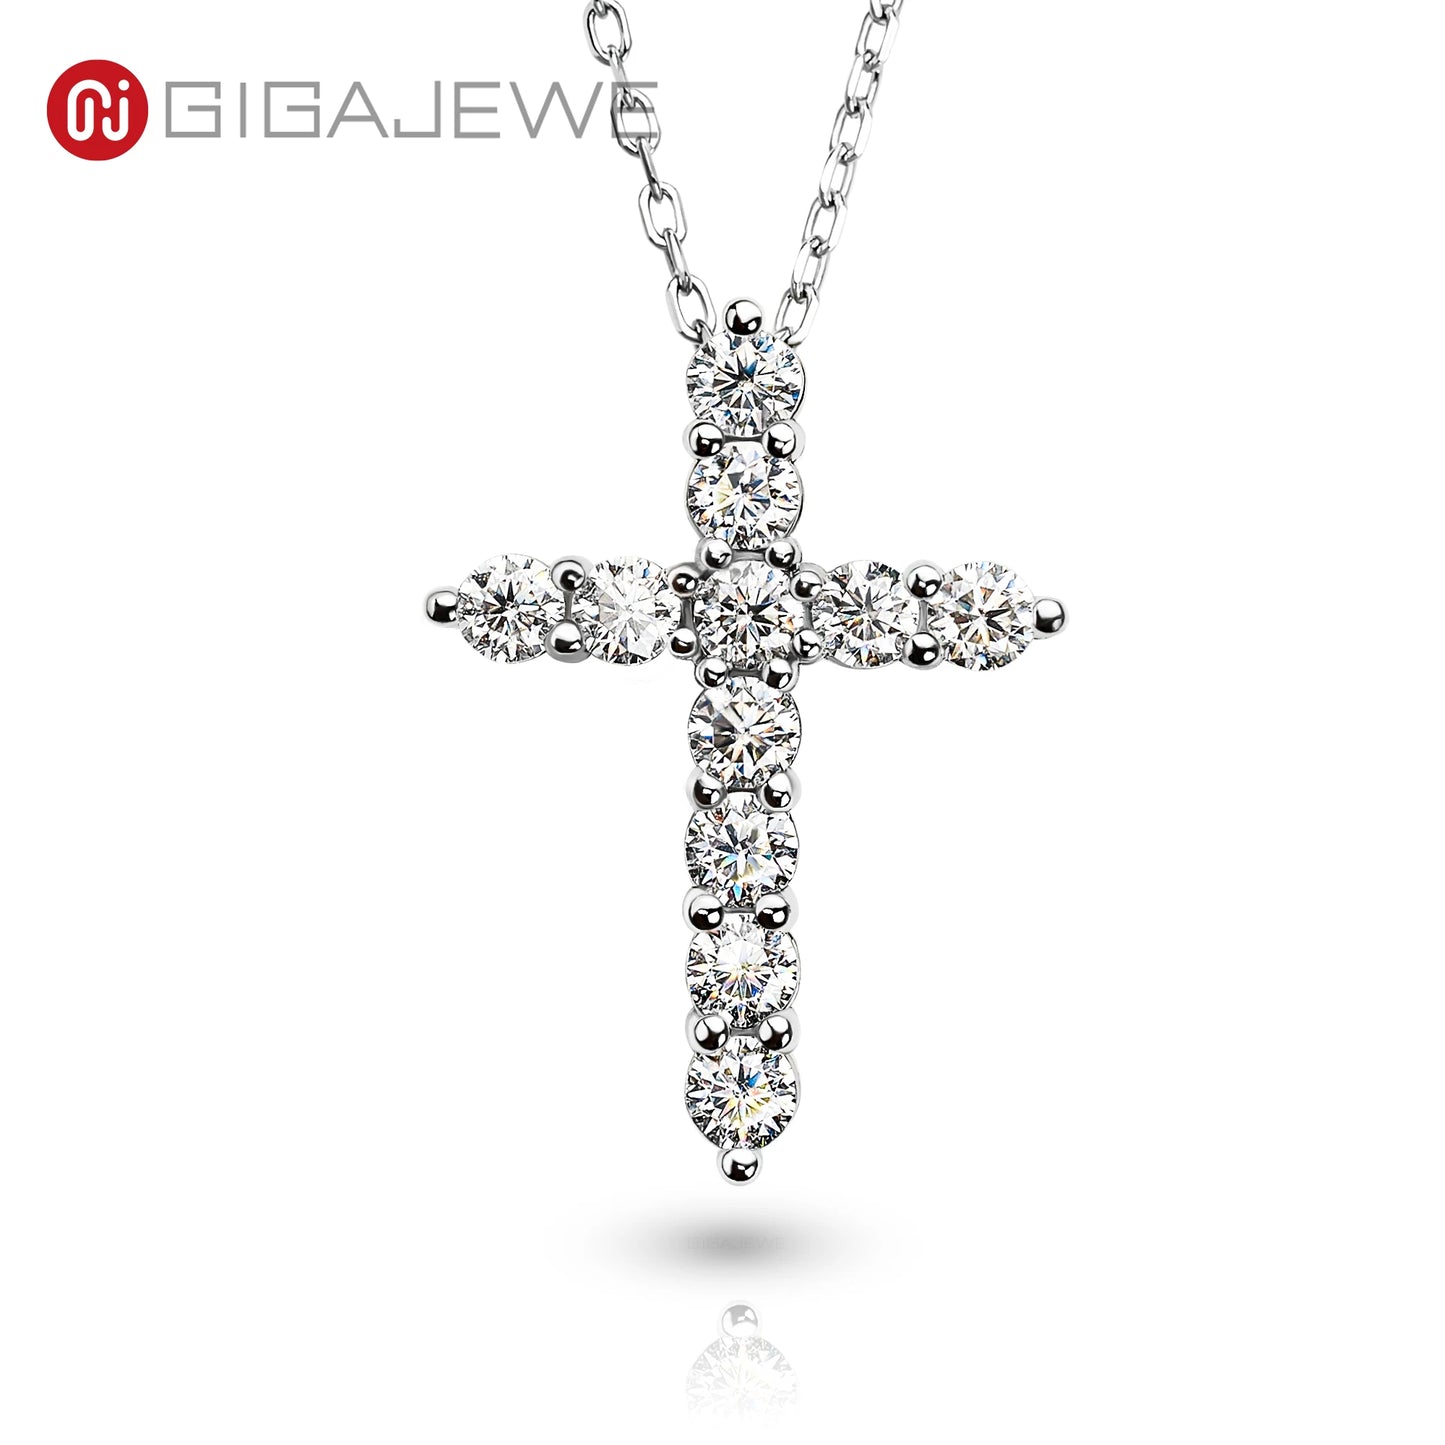 GIGAJEWE Total 1.1ct 3mmX11 Round Cut D VVS1 Moissanite 925 Silver Christian Religious Cross Pendant Necklace Woman Girl Gift